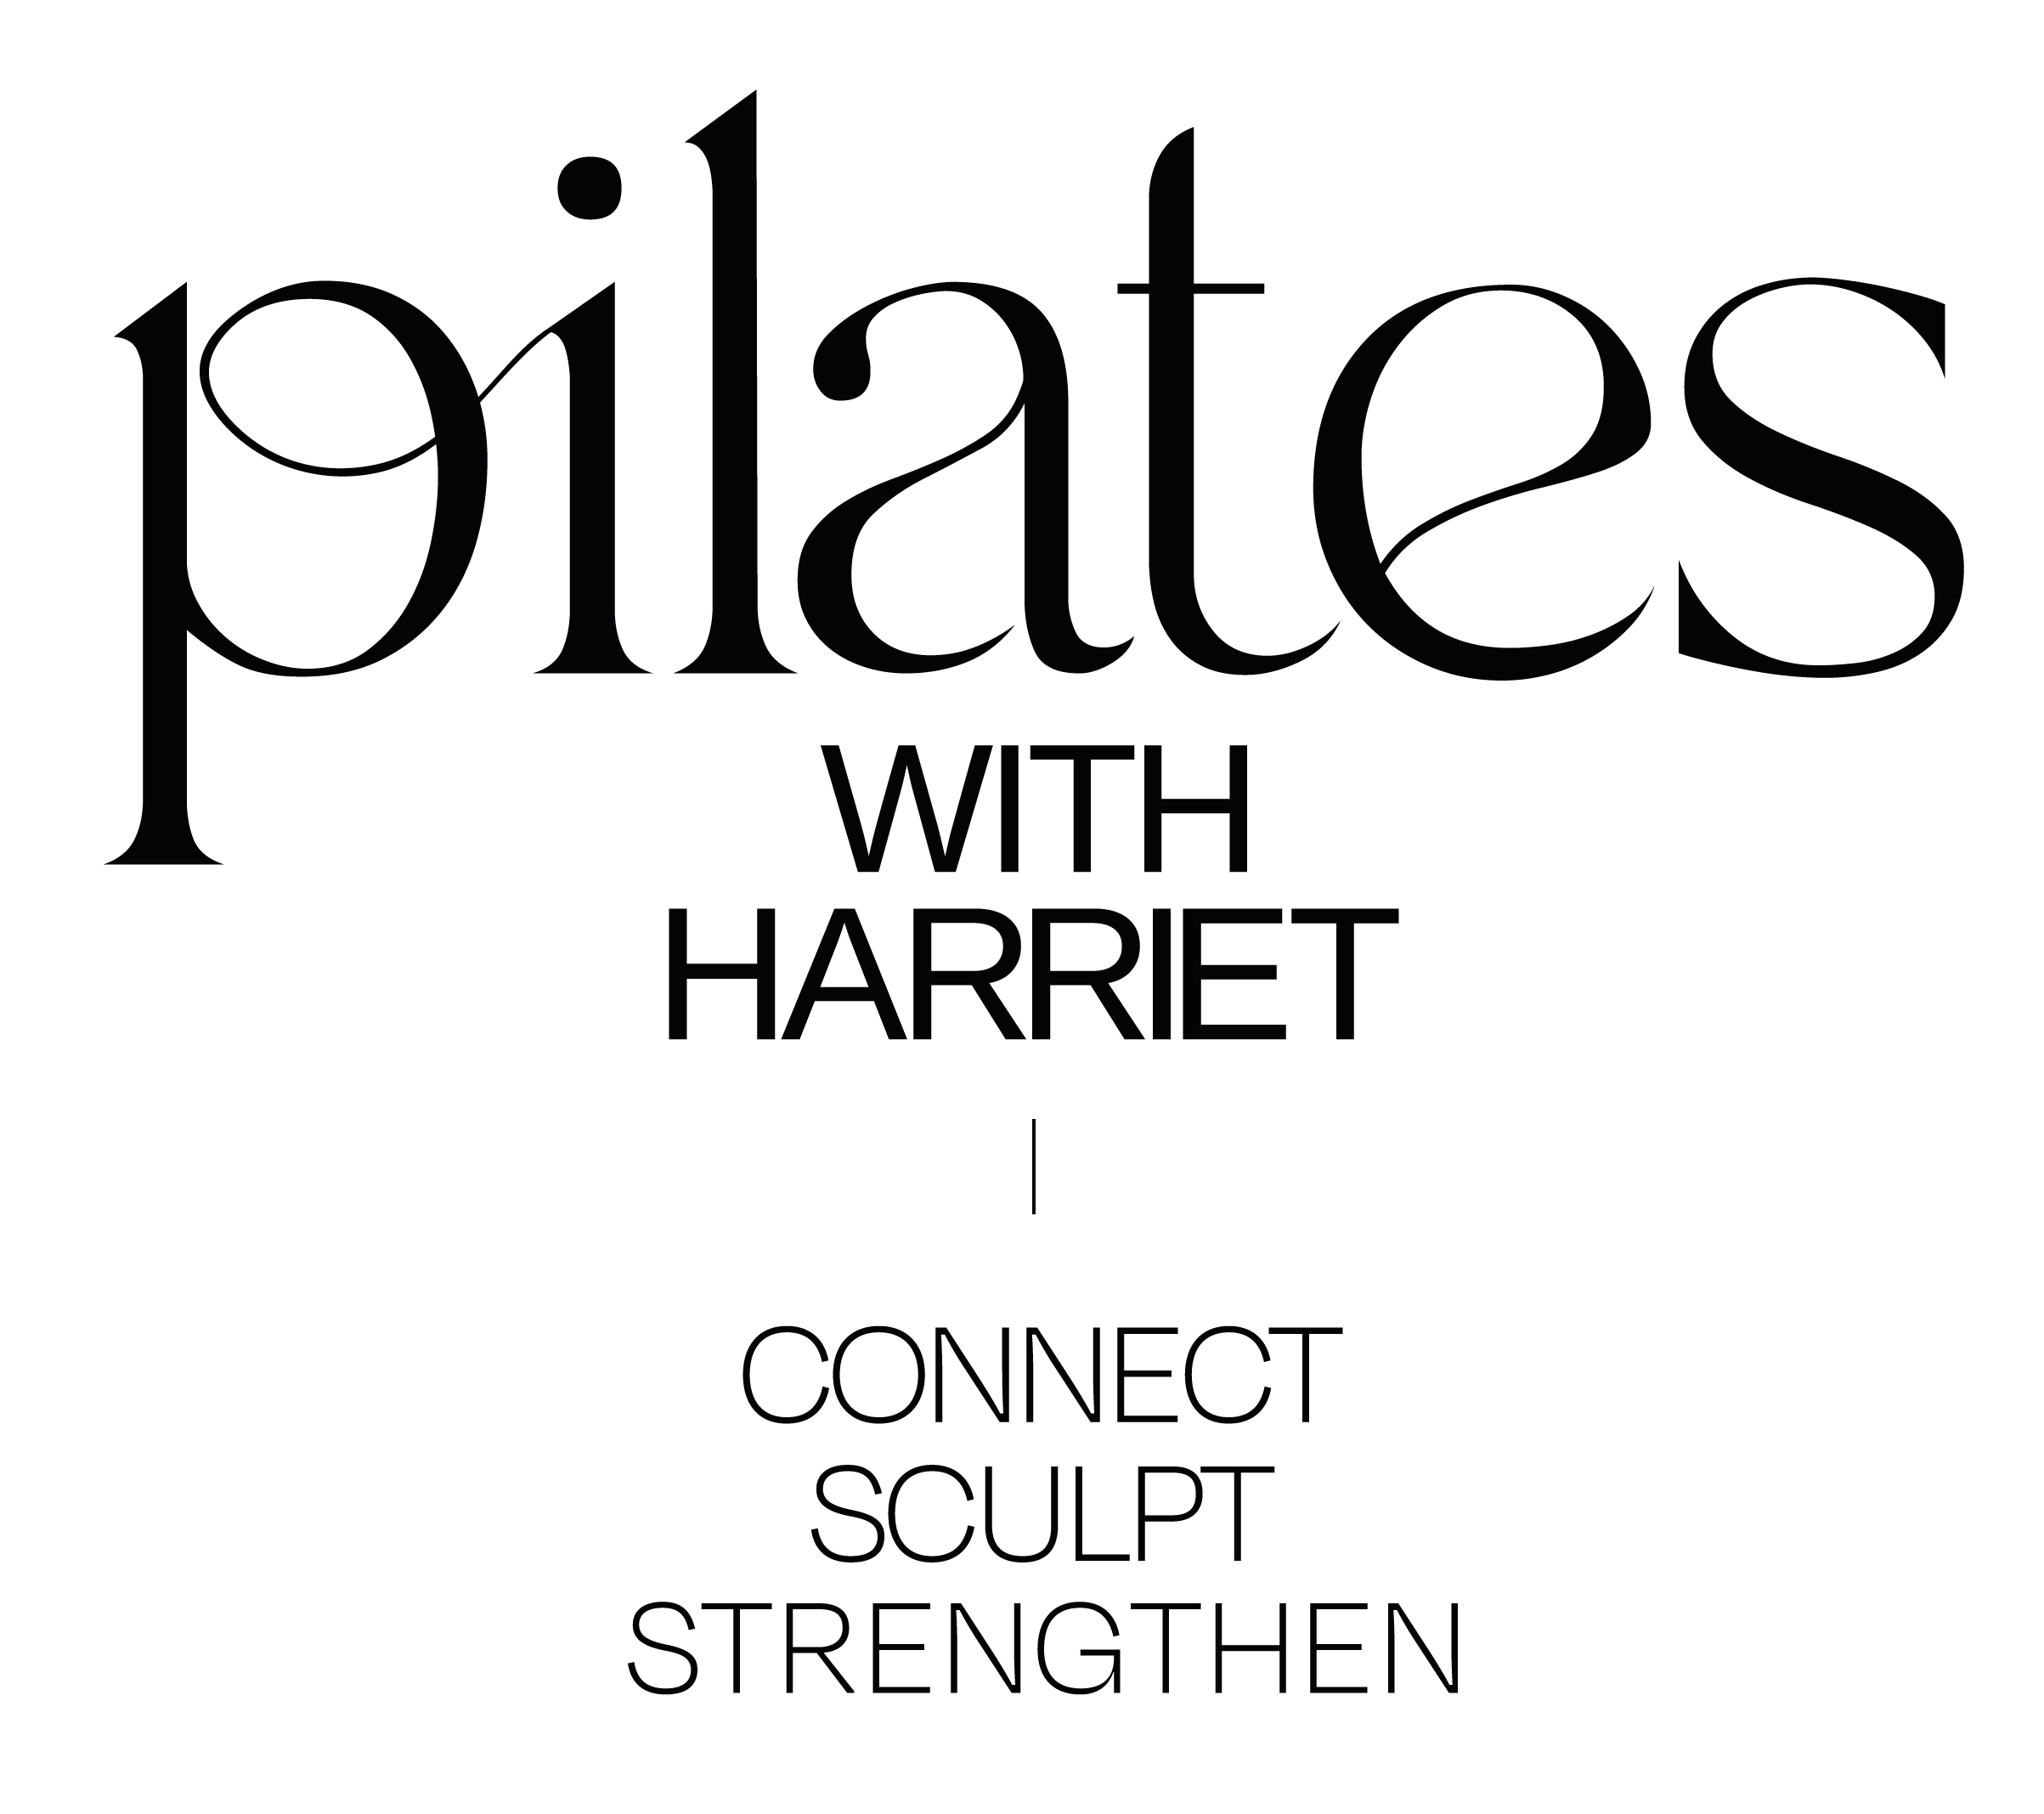 Pilates With Harriet logo with tagline - Connect, Sculpt, Strengthen